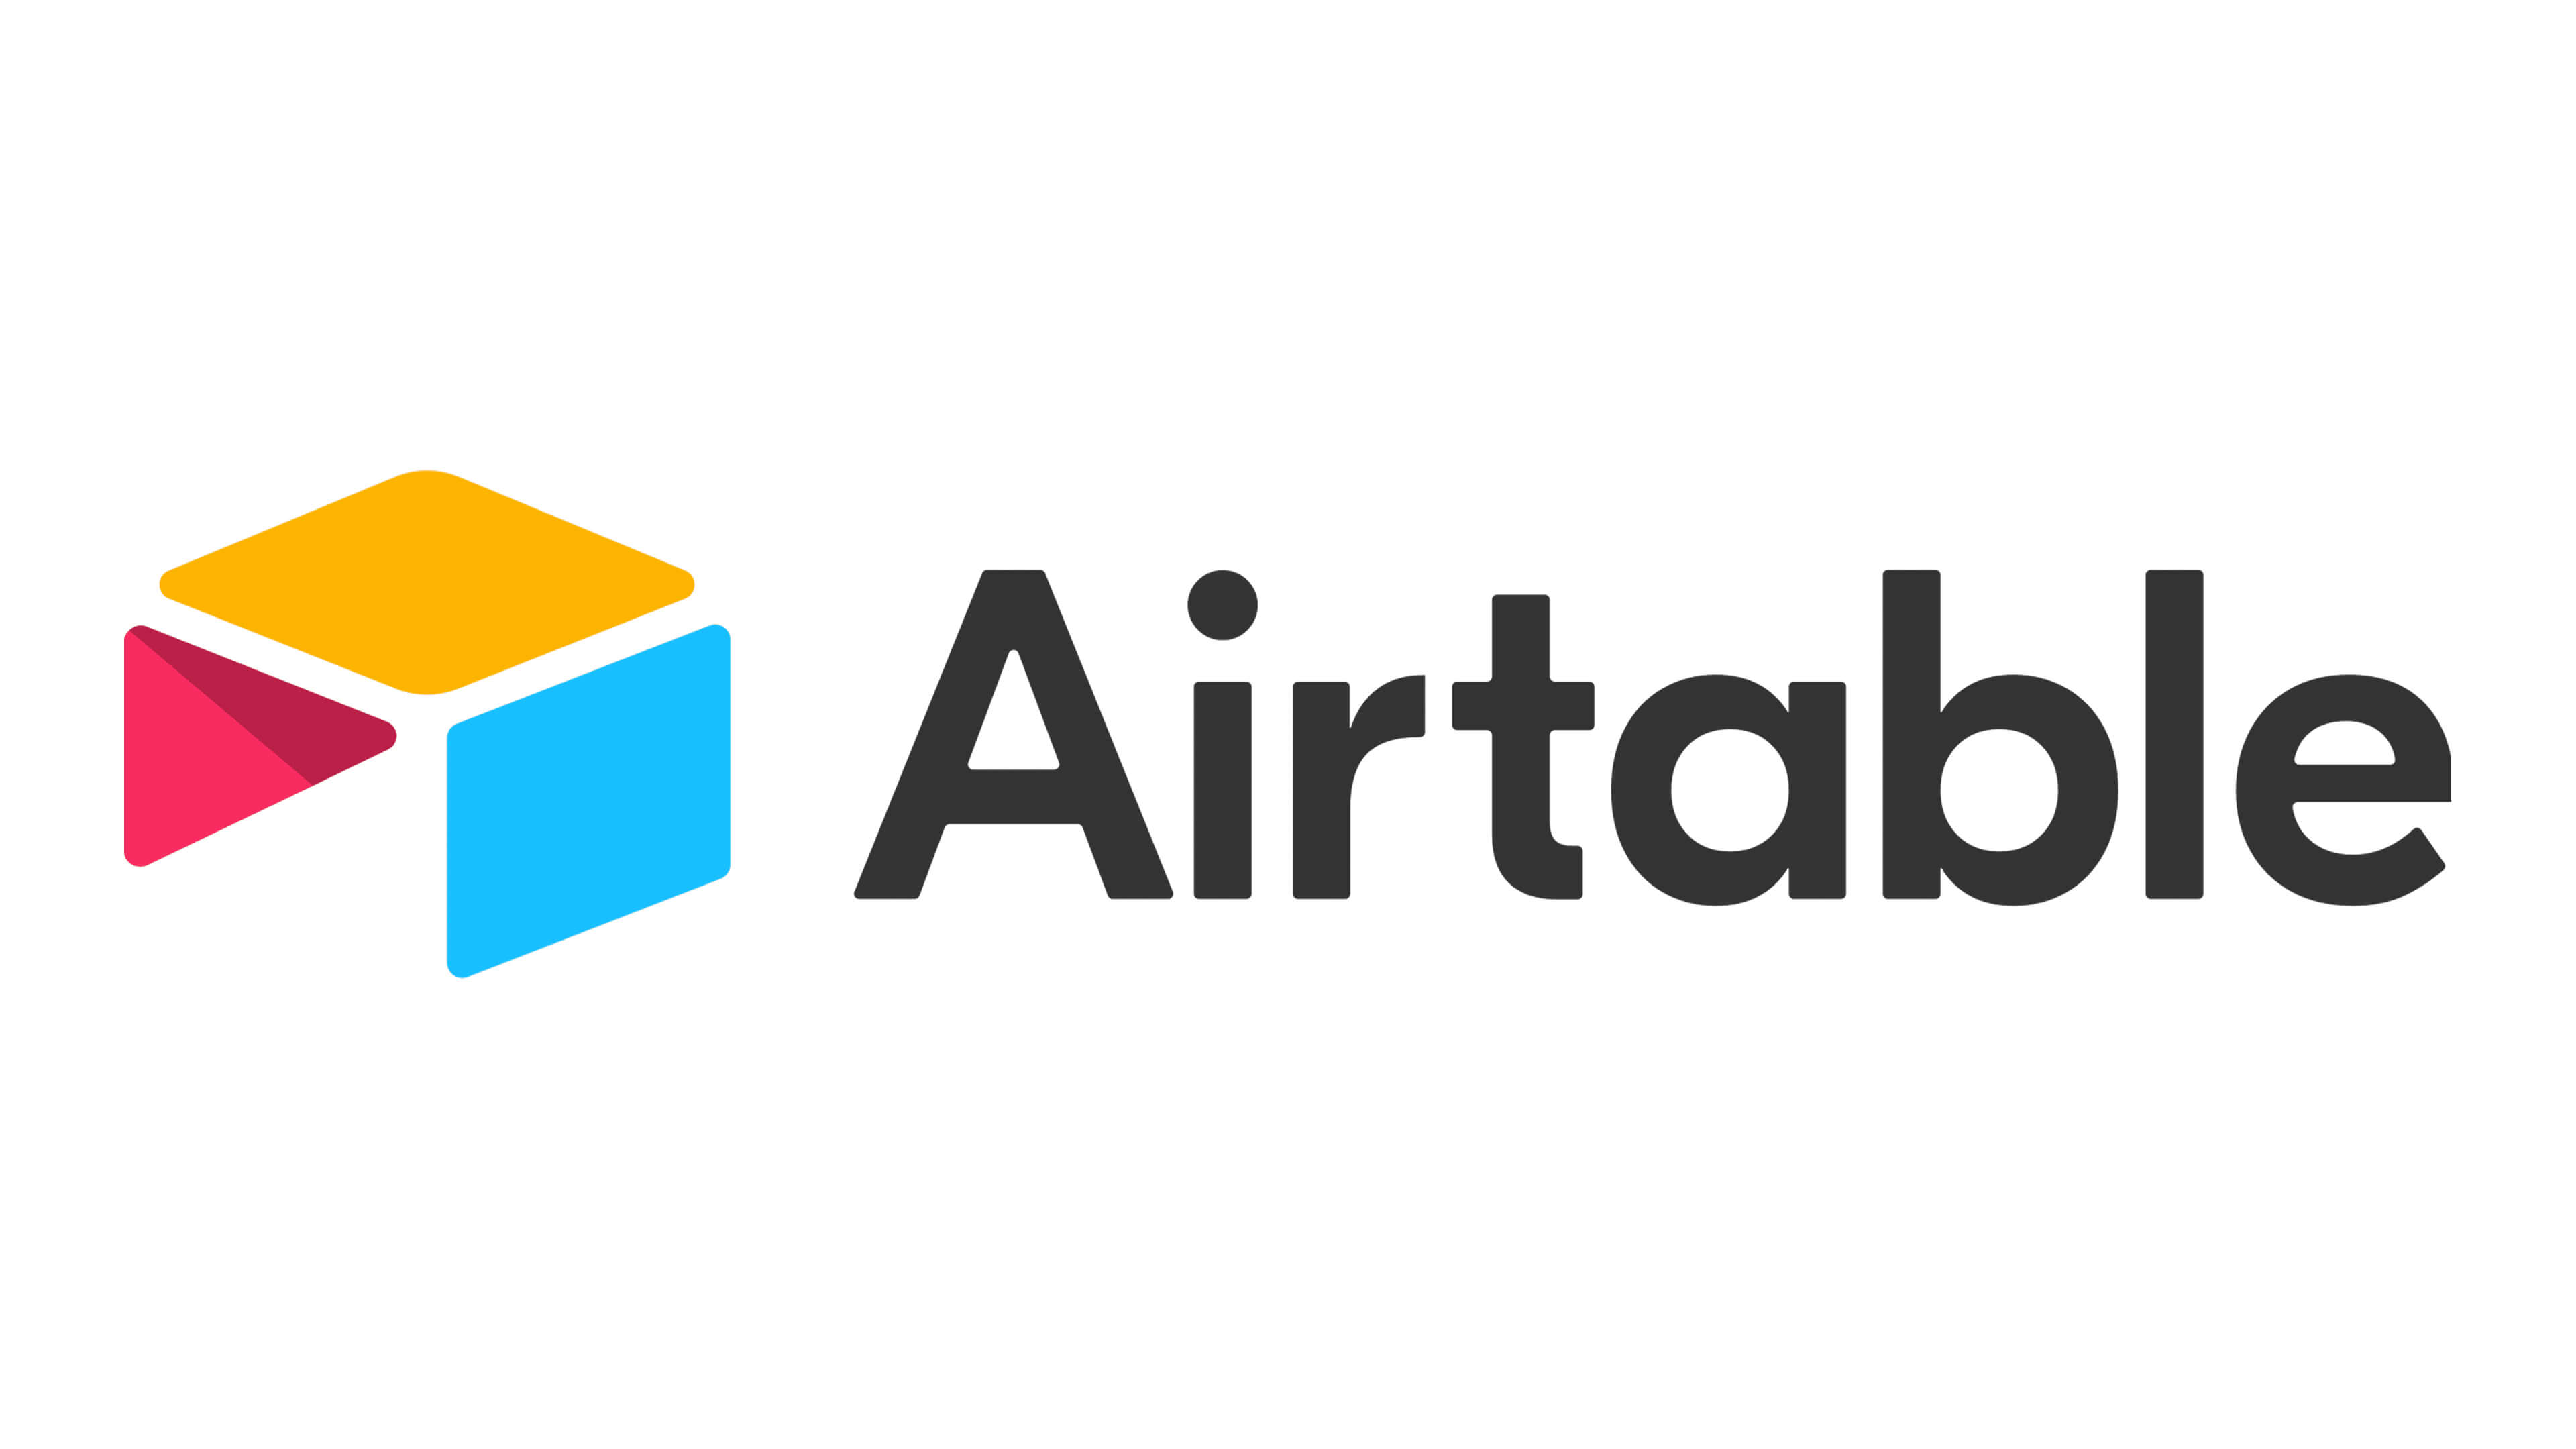 Airtable logo features bold typography and shades of blue, yellow, and red.